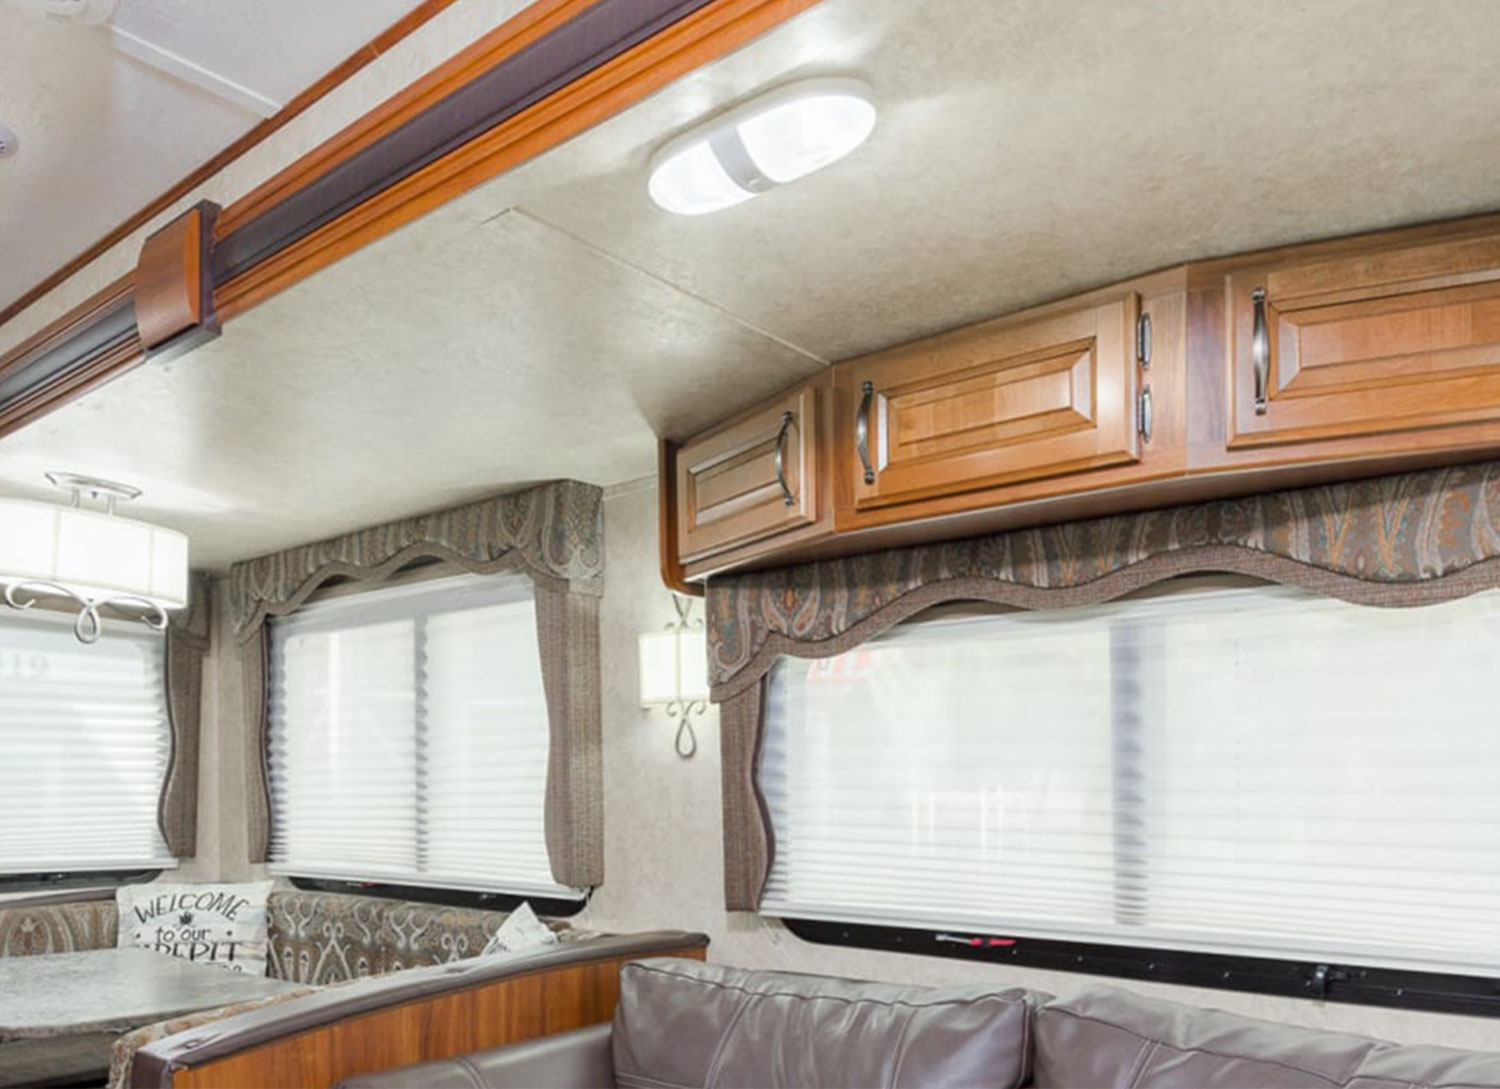 internal view of a 2015 Keystone Cougar with outdated valances